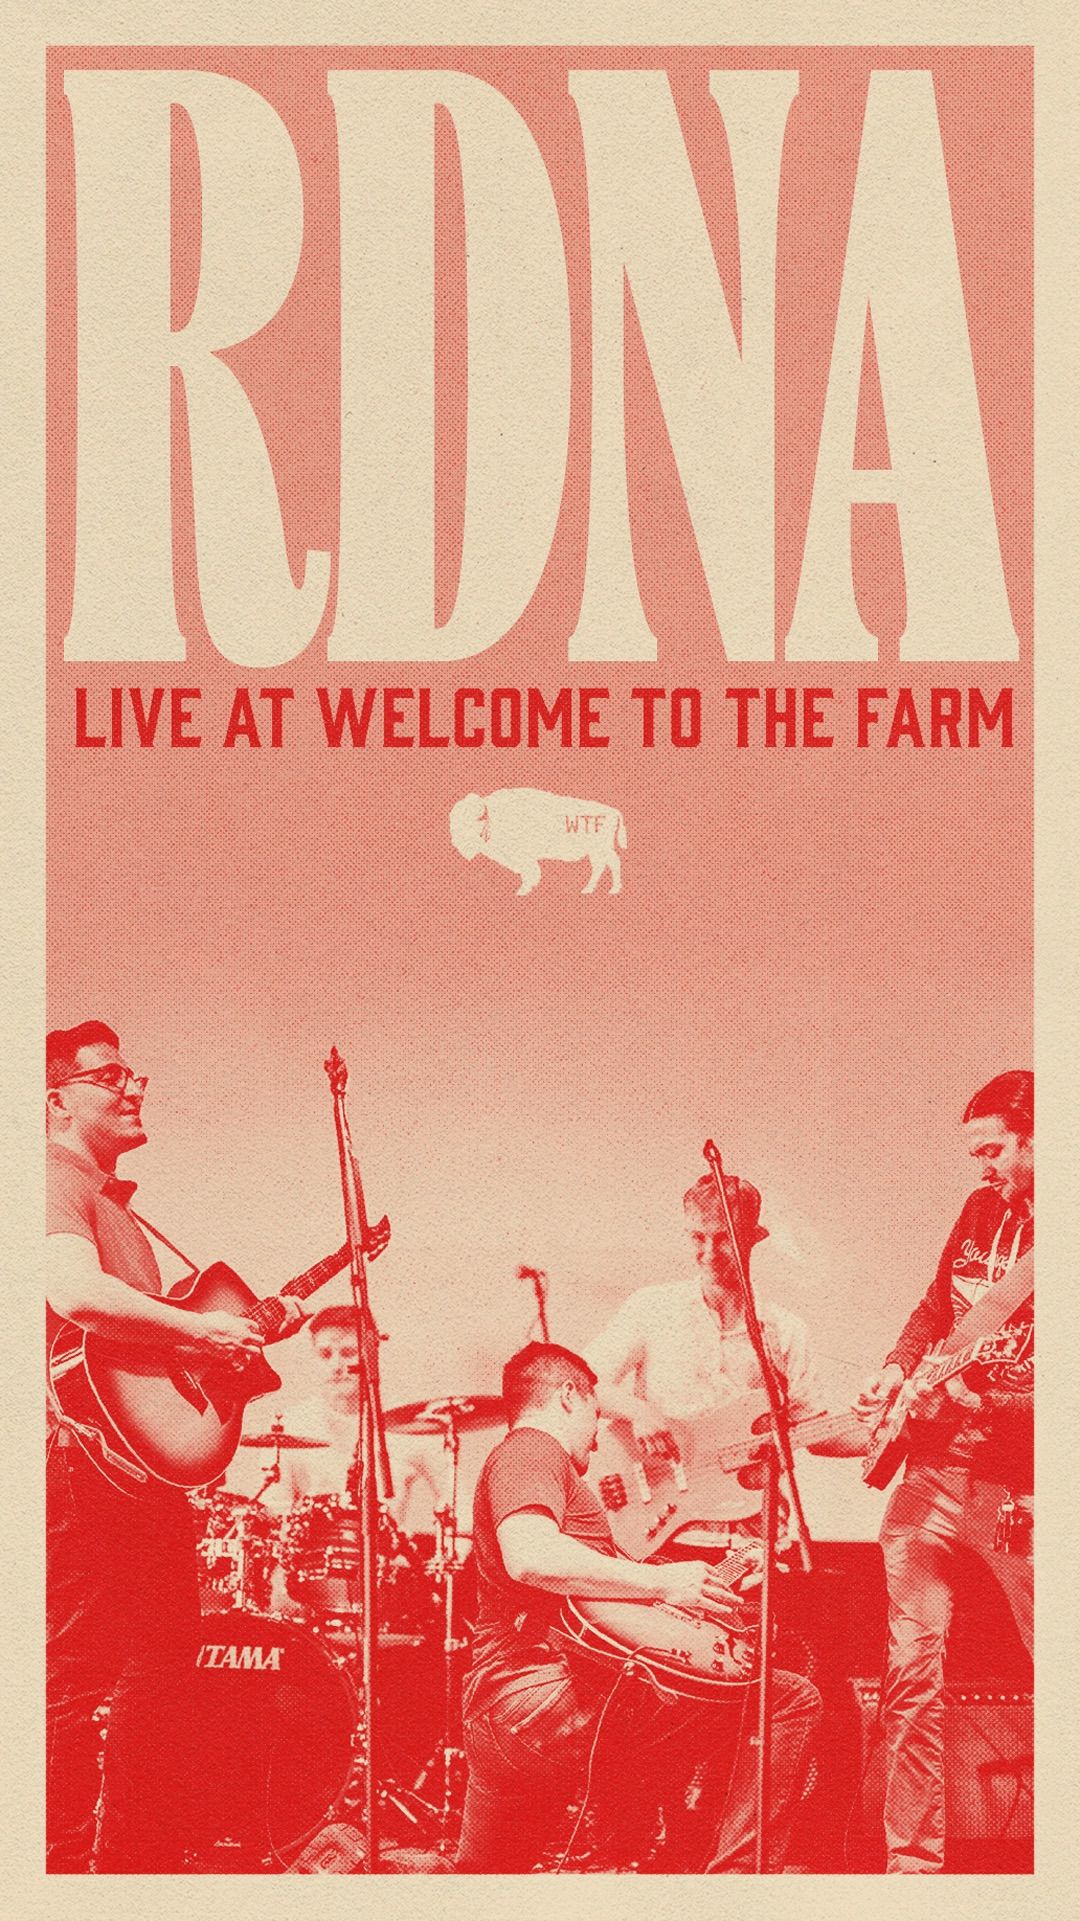 RDNA BACK AT WELCOME TO THE FARM (Night 2)